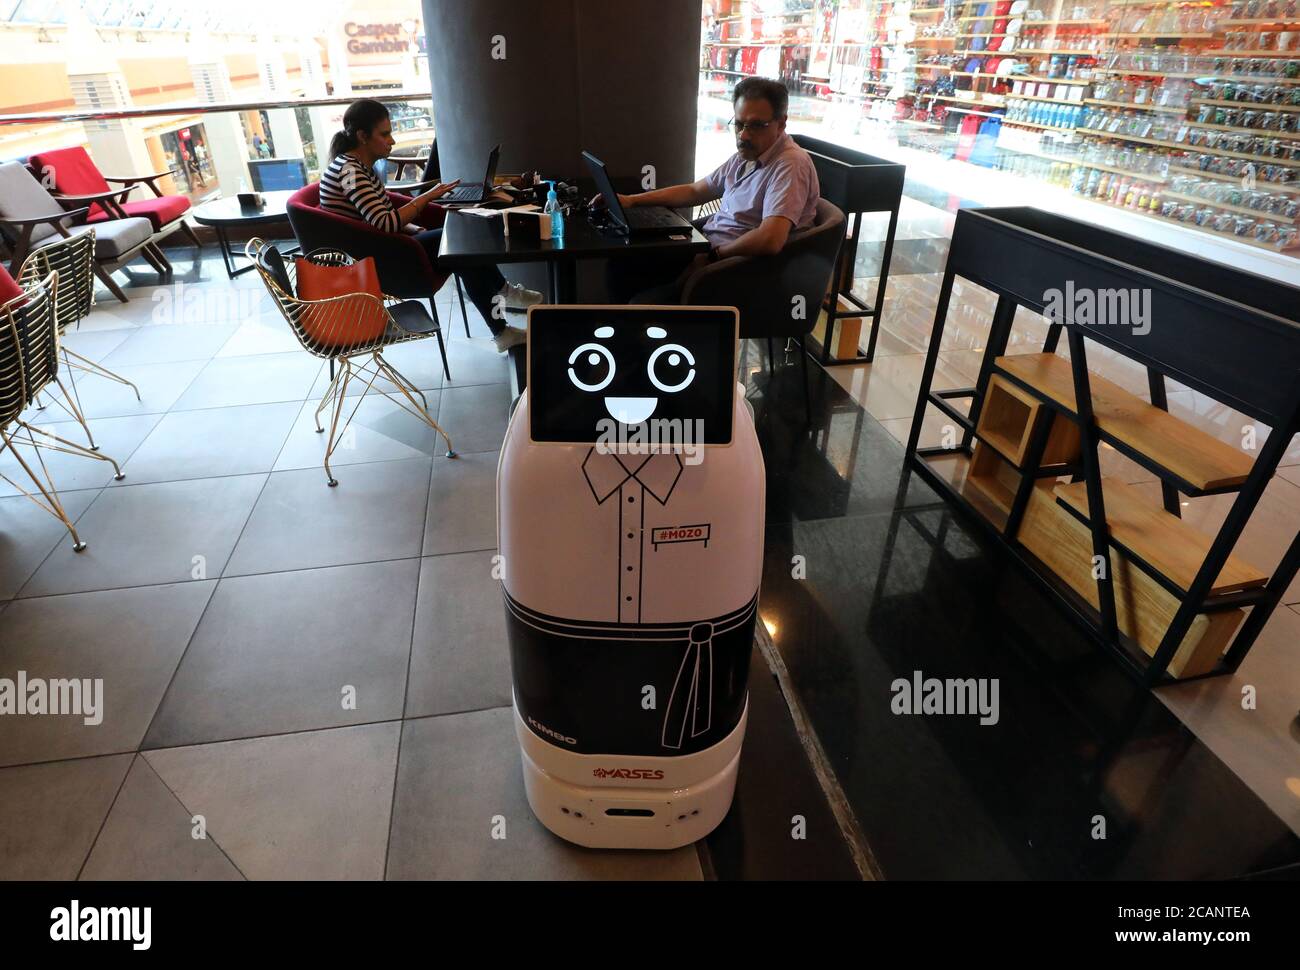 Cairo, Egypt. 7th Aug, 2020. A robot named Mozo, which means waiter in Spanish, delivers meals to customers at Kimbo Restaurant & Cafe in Cairo, Egypt, on Aug. 7, 2020. For the first time in Egypt, a restaurant has hired a robot to assist in serving the customers to maintain social distancing amid the COVID-19 pandemic. TO GO WITH 'Feature: Egyptian restaurant hires robot waiter to maintain social distancing amid COVID-19 outbreak' Credit: Ahmed Gomaa/Xinhua/Alamy Live News Stock Photo